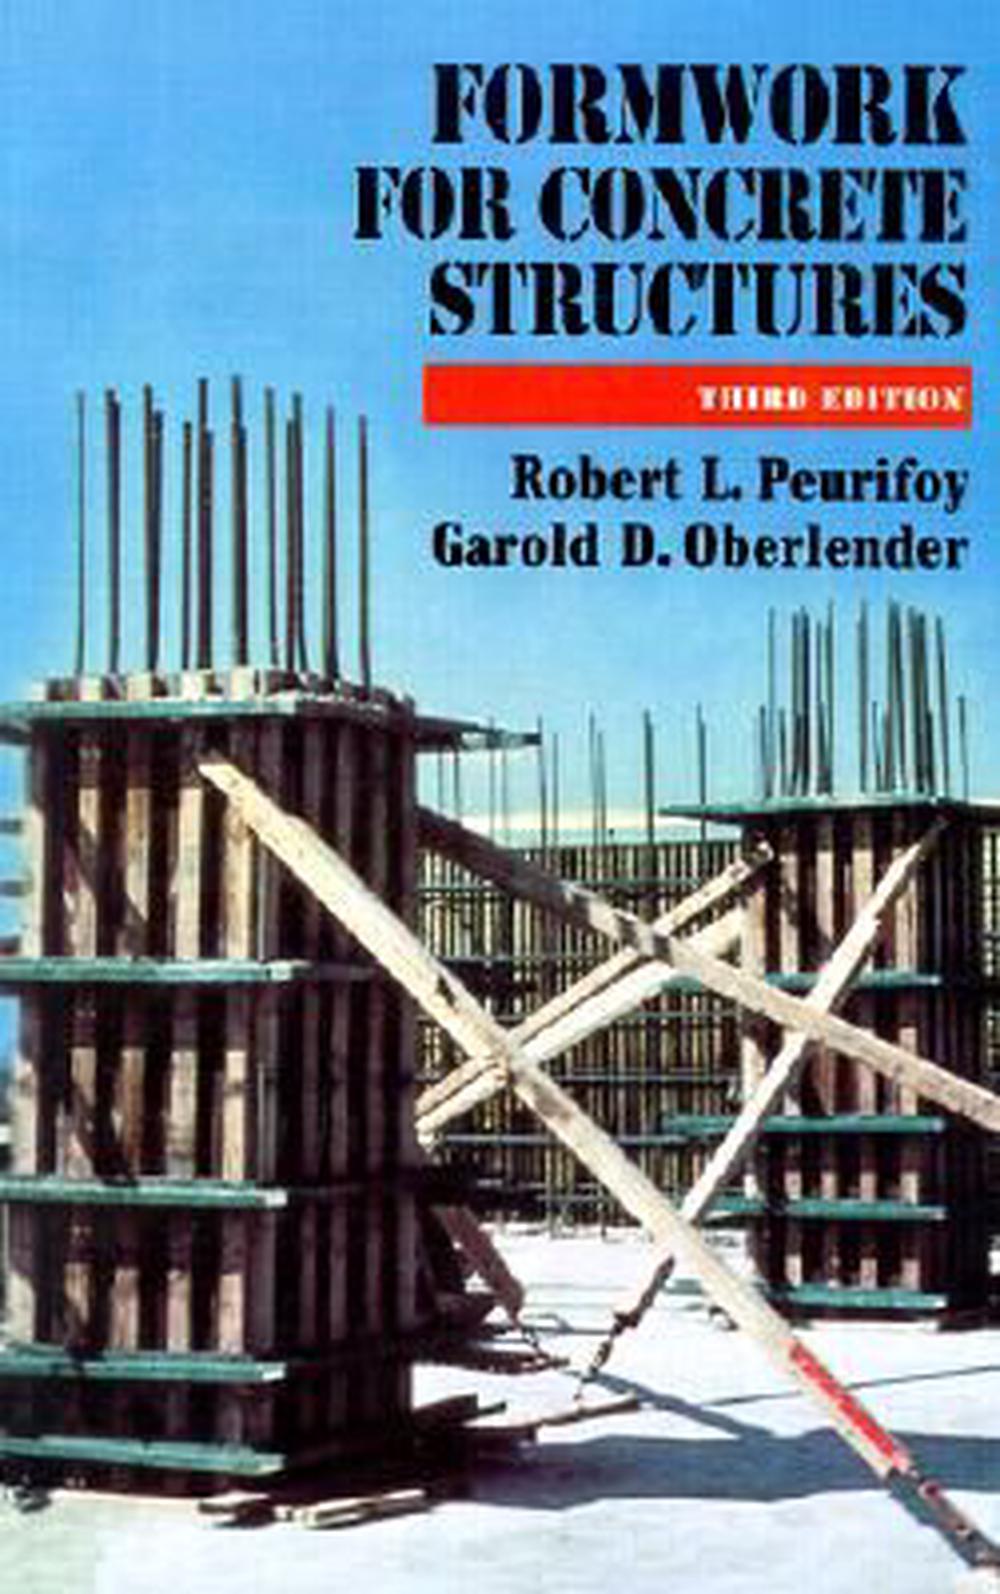 Formwork for Concrete Structures by Robert L. Peurifoy, Hardcover